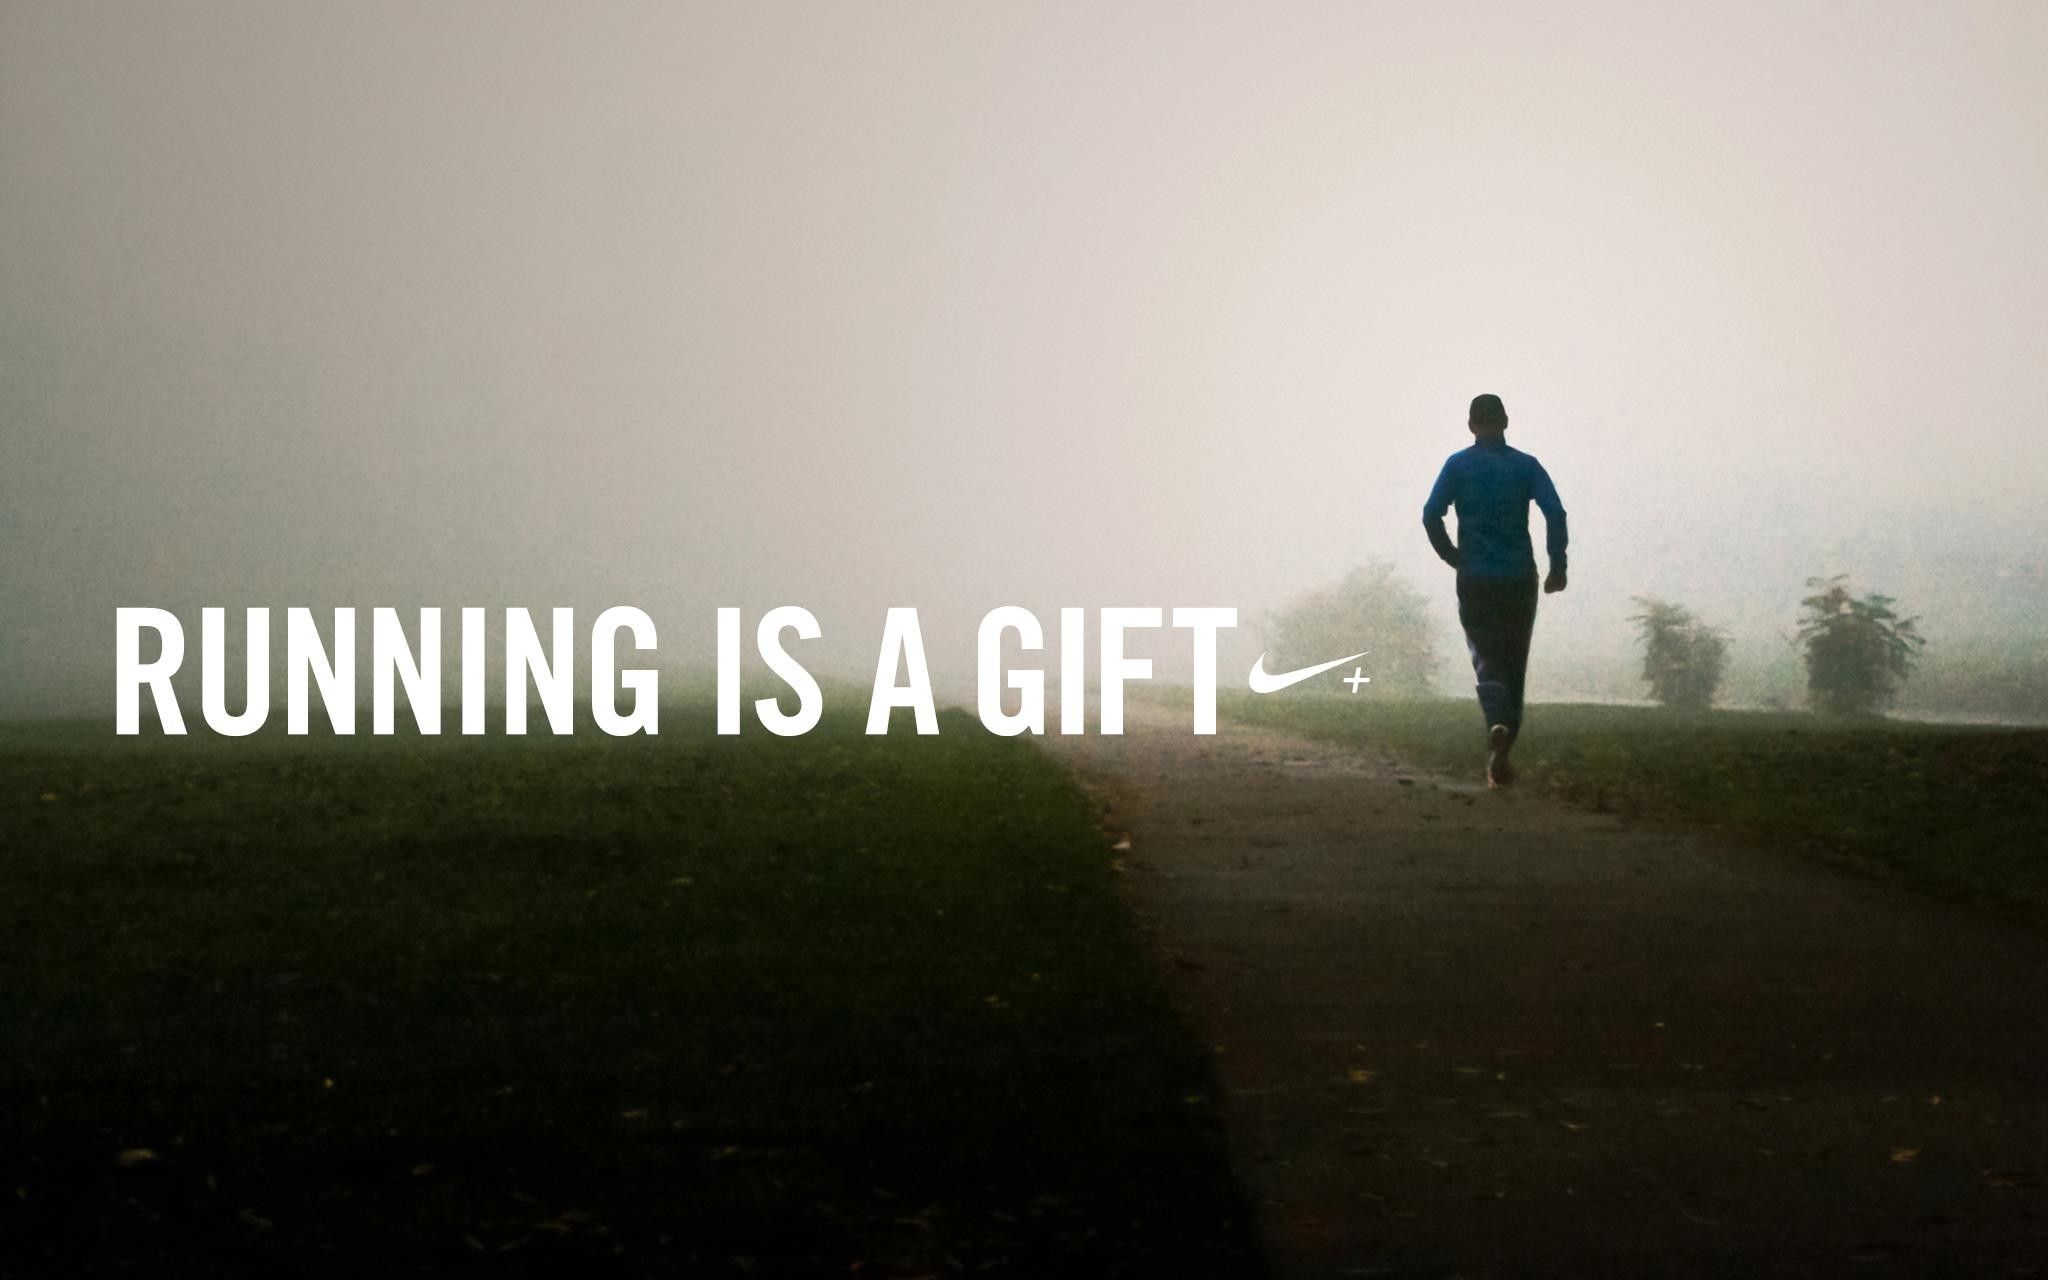 Running is a gift